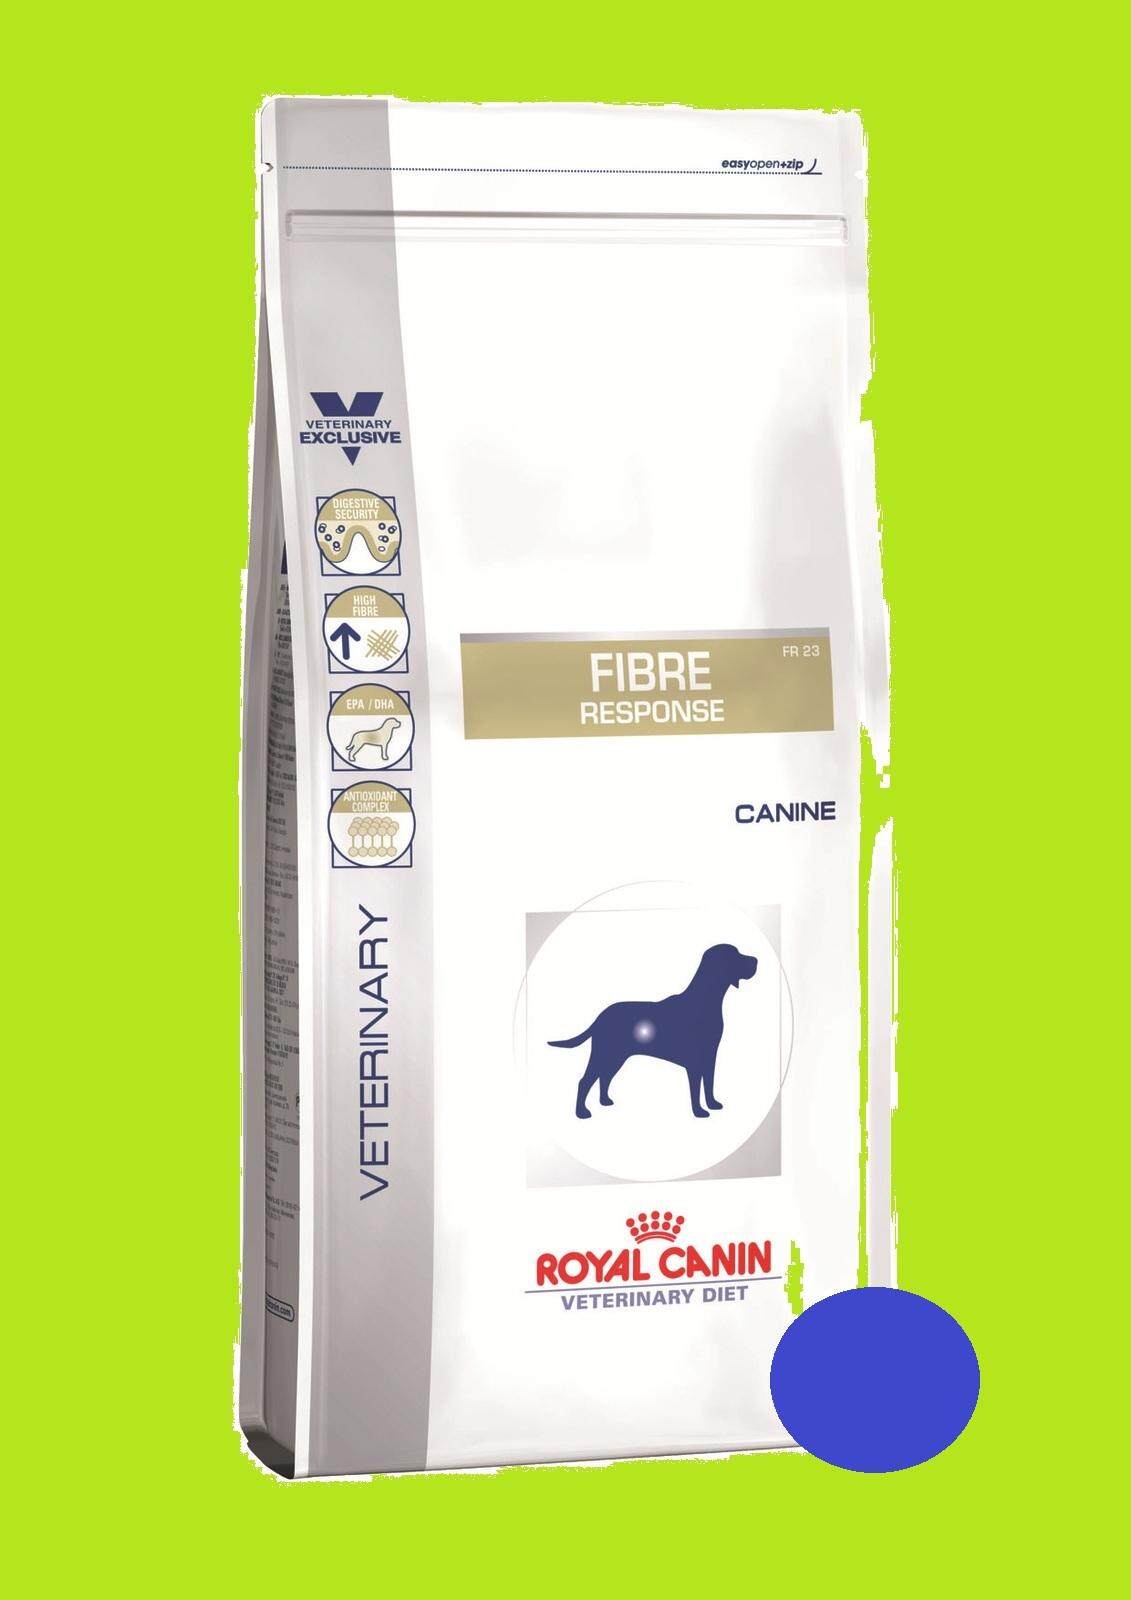 royal canin hypoallergenic small dog 3.5 kg